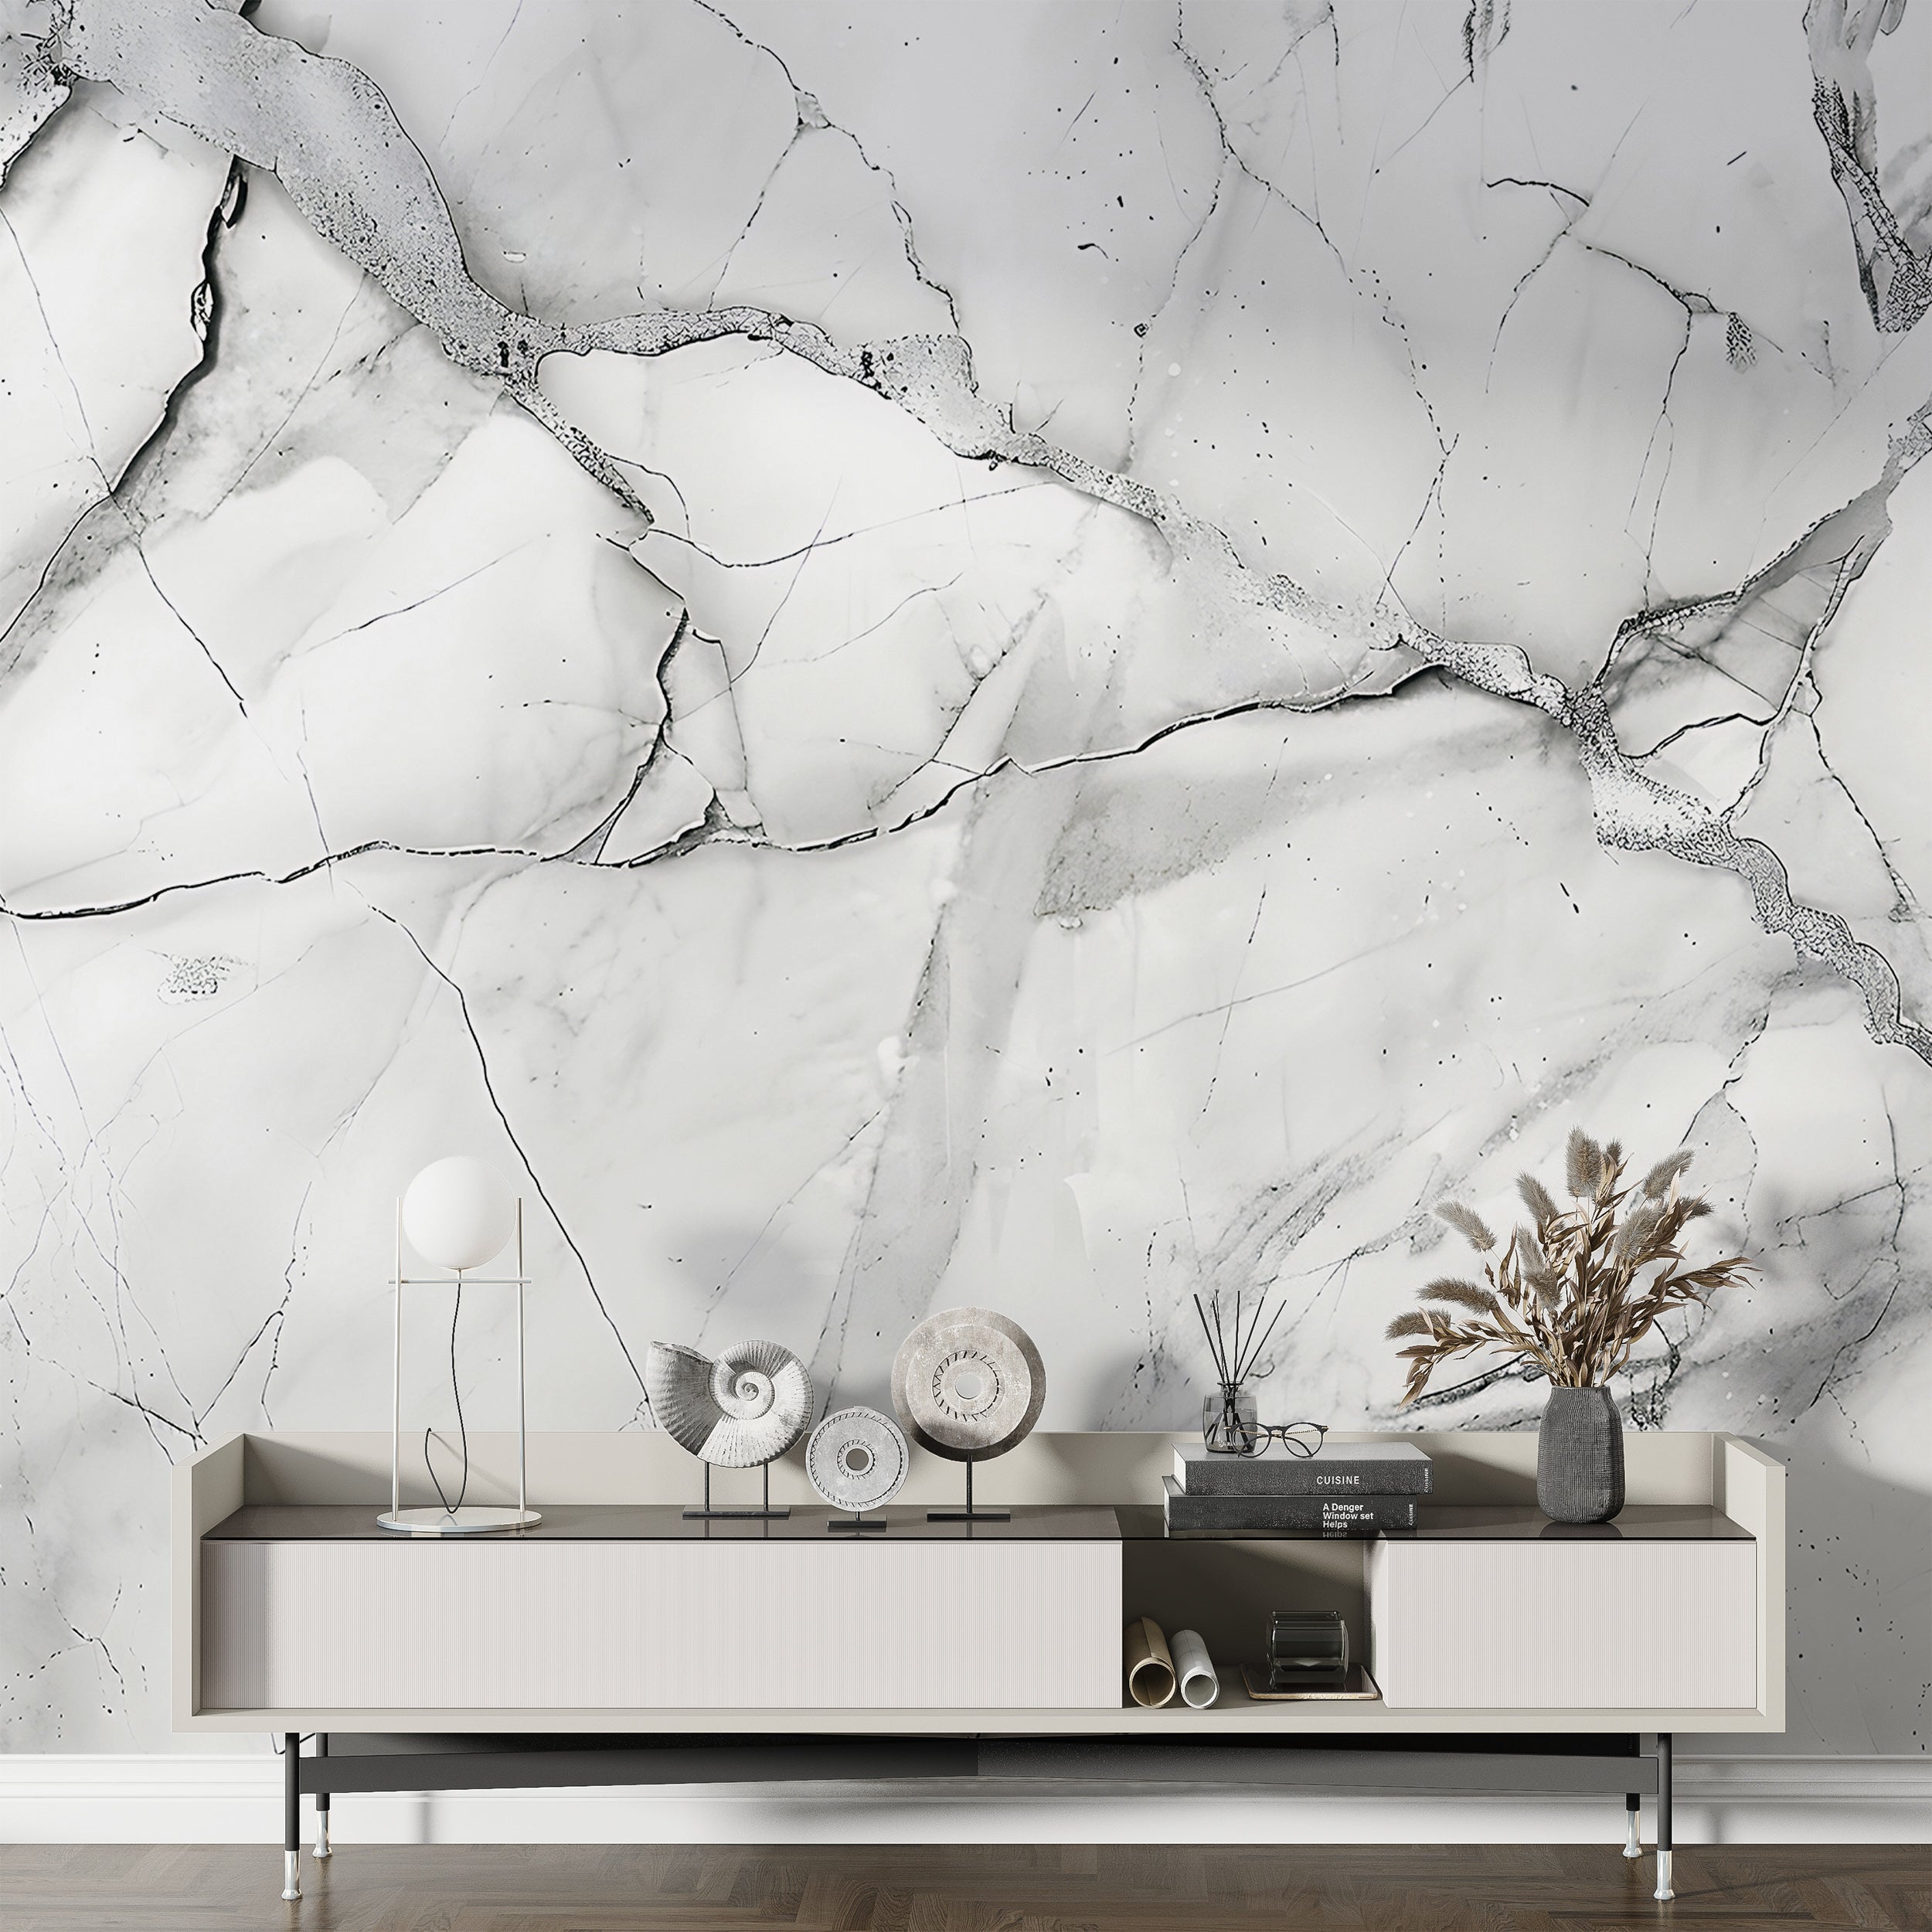 White and Grey Marble Wallpaper, Self-adhesive Natural Marble Wall Mural, Removable Modern Stone Texture Wall Decal, Luxury Decor